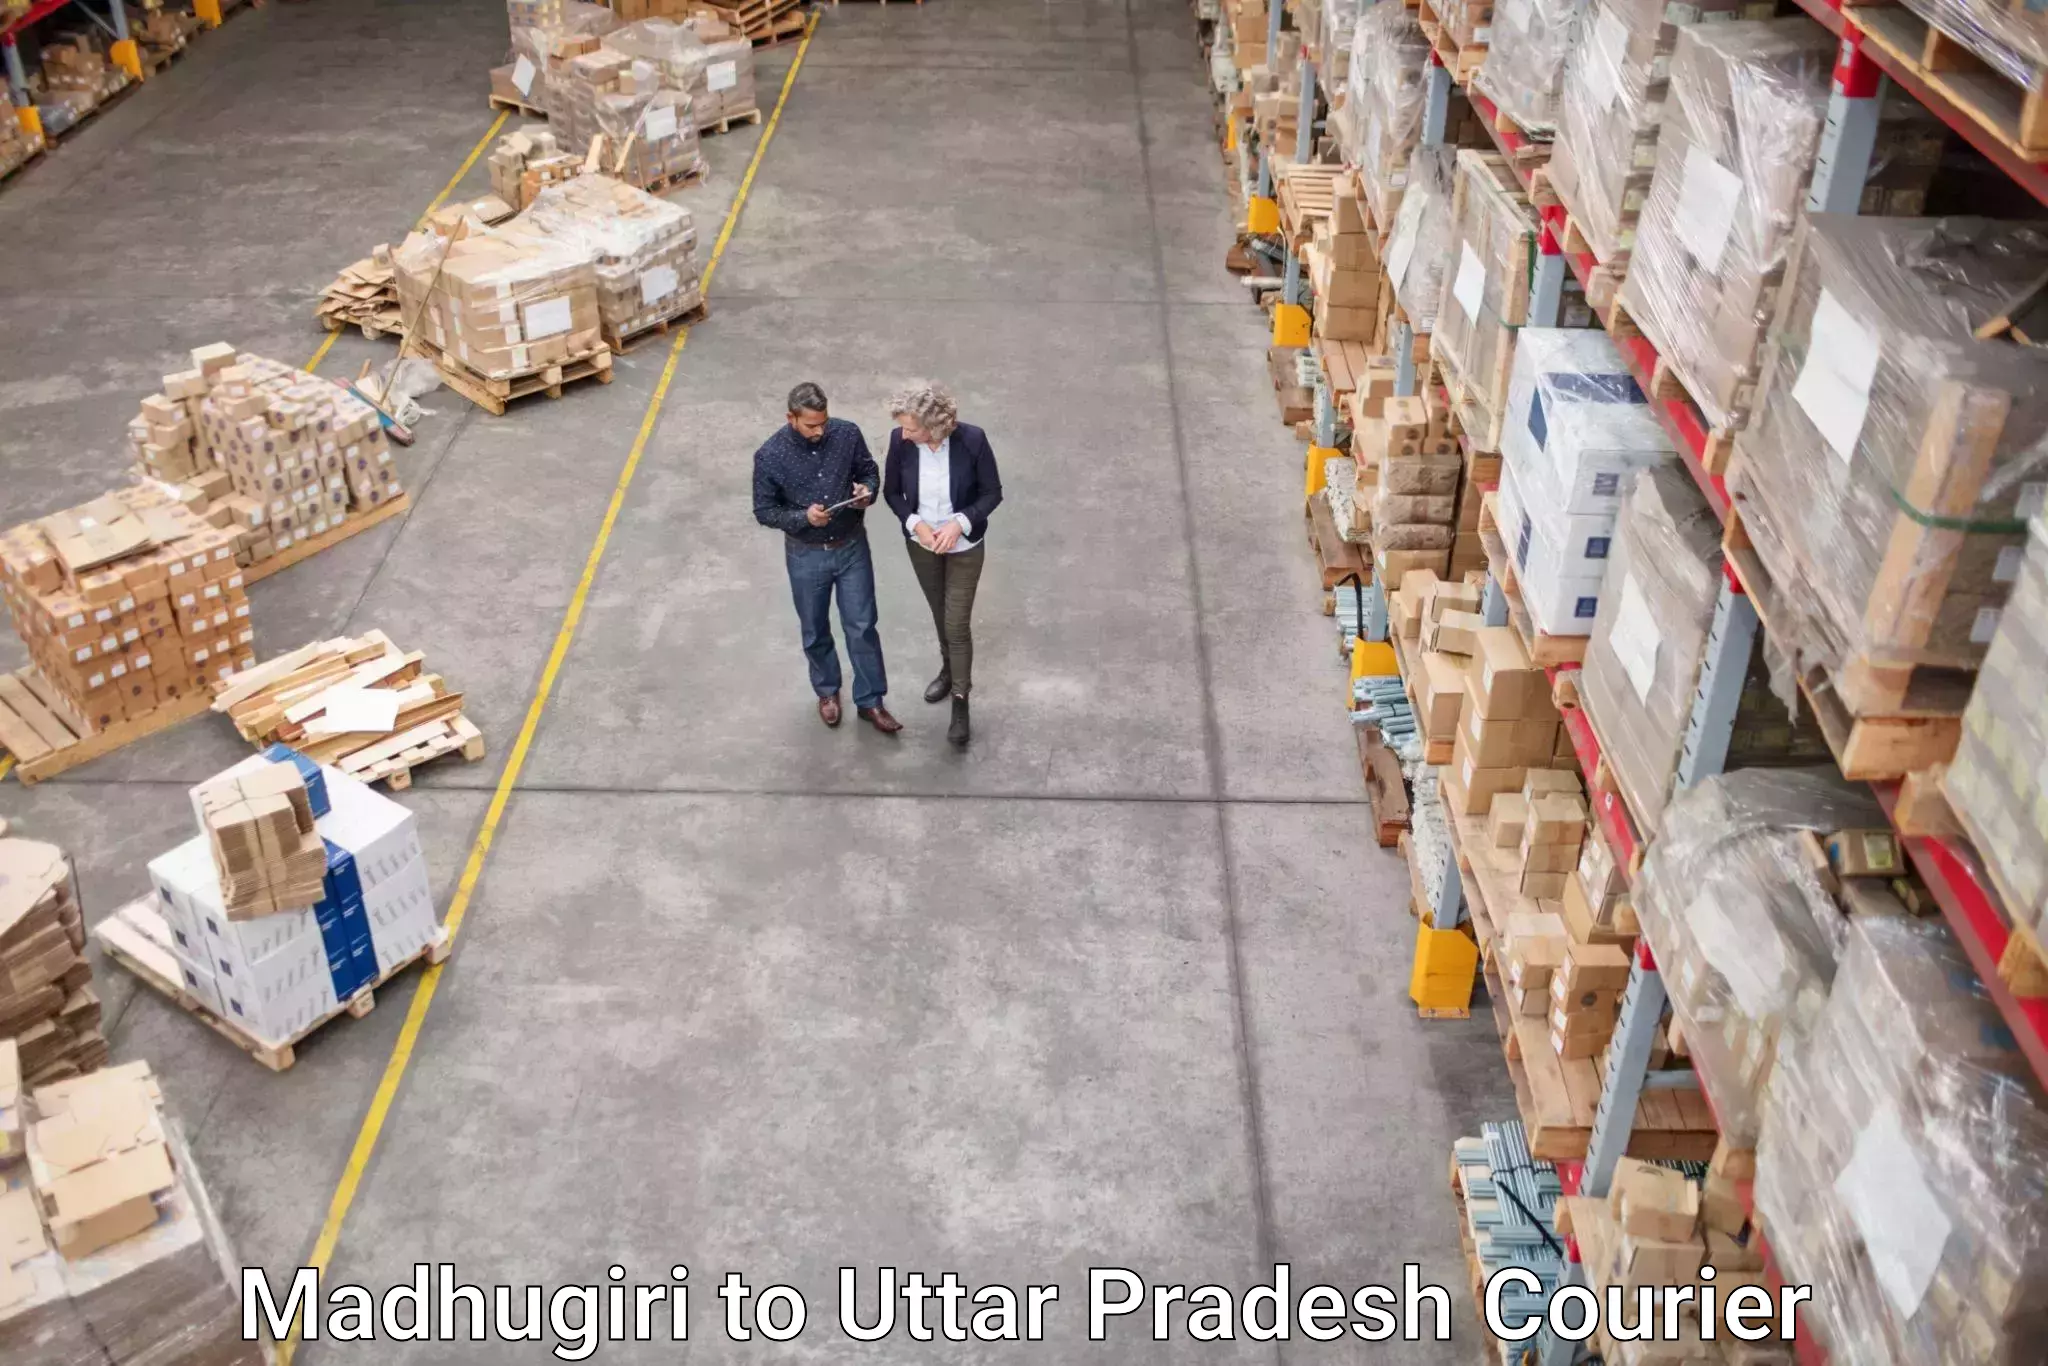 Fragile item shipping in Madhugiri to Bhathat